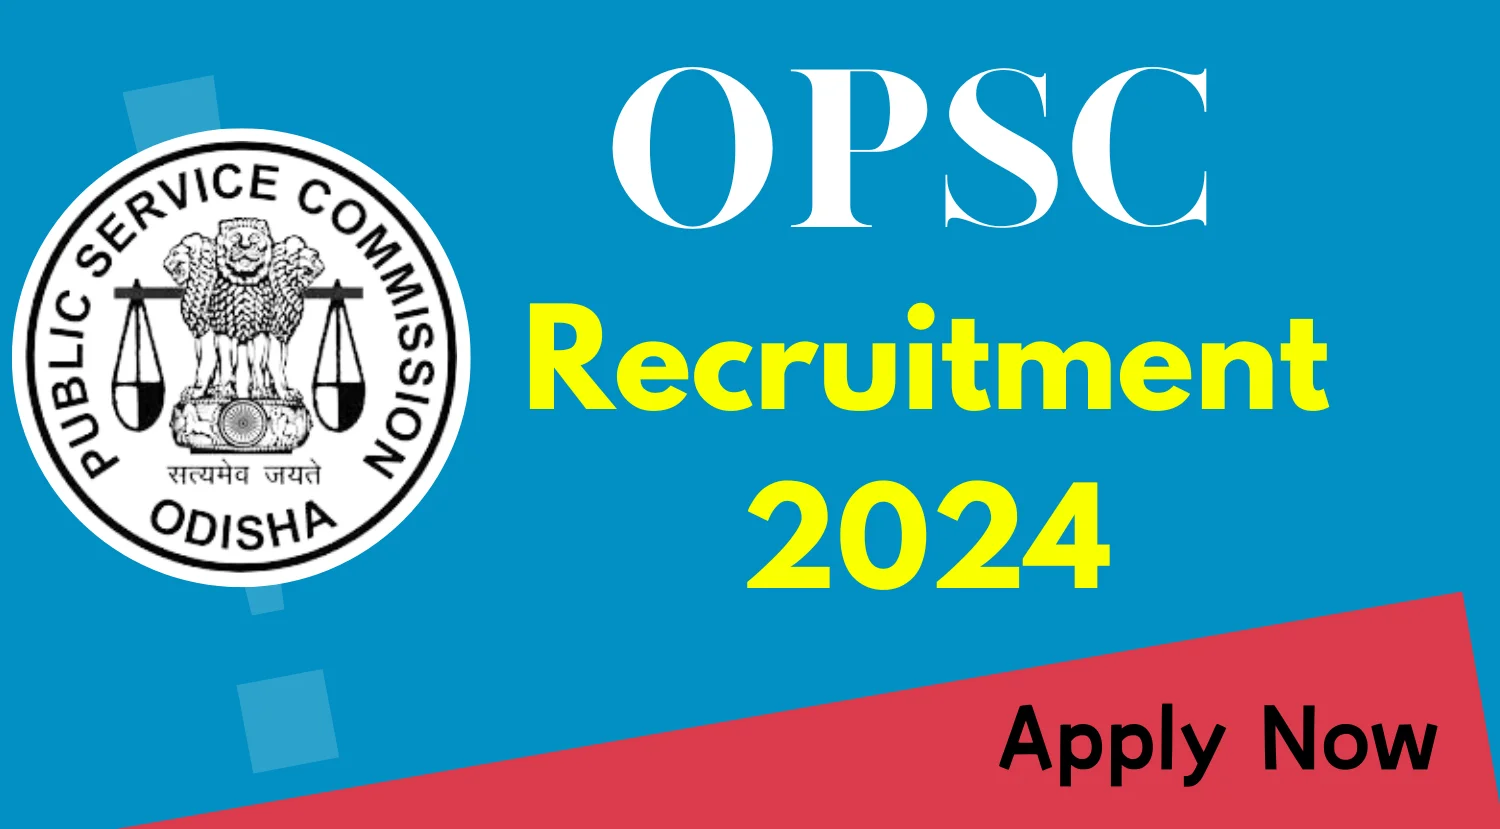 OPSC Assistant Fisheries Officer Recruitment 2024